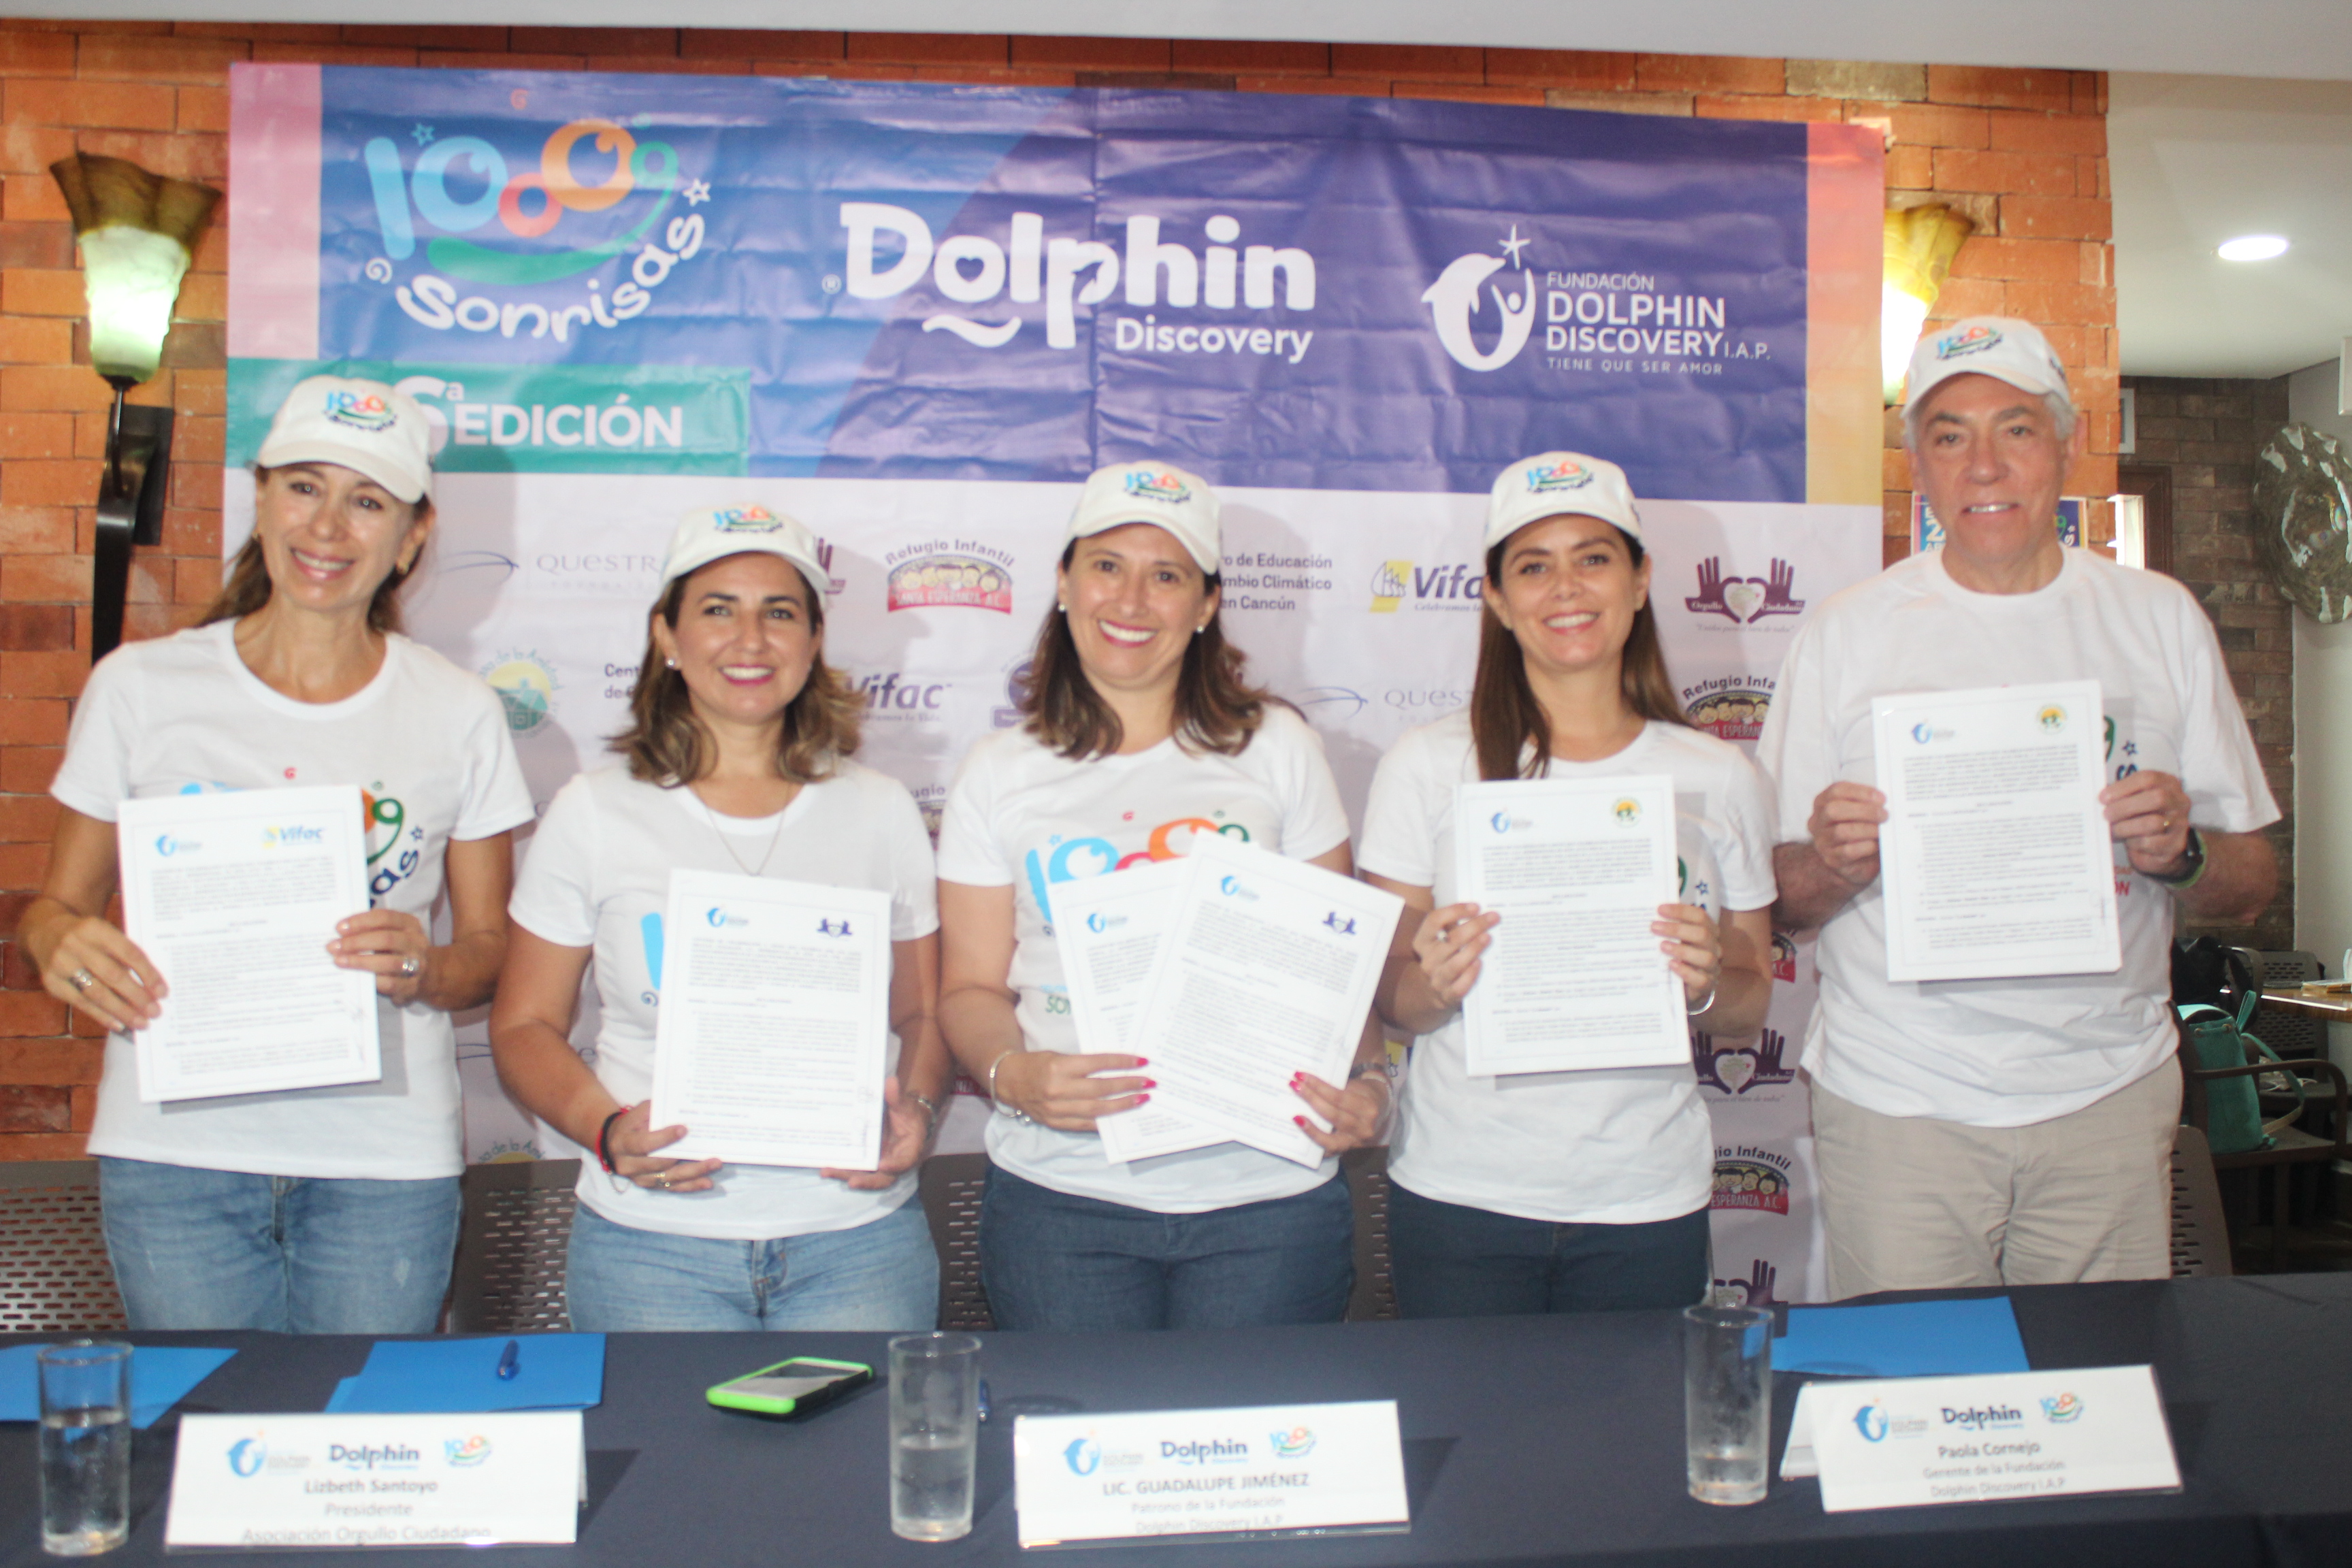 FUNDACIï¿½N DOLPHIN DISCOVERY SIGNED AN AGREEMENT WITH BENEFITED ASSOCIATIONS